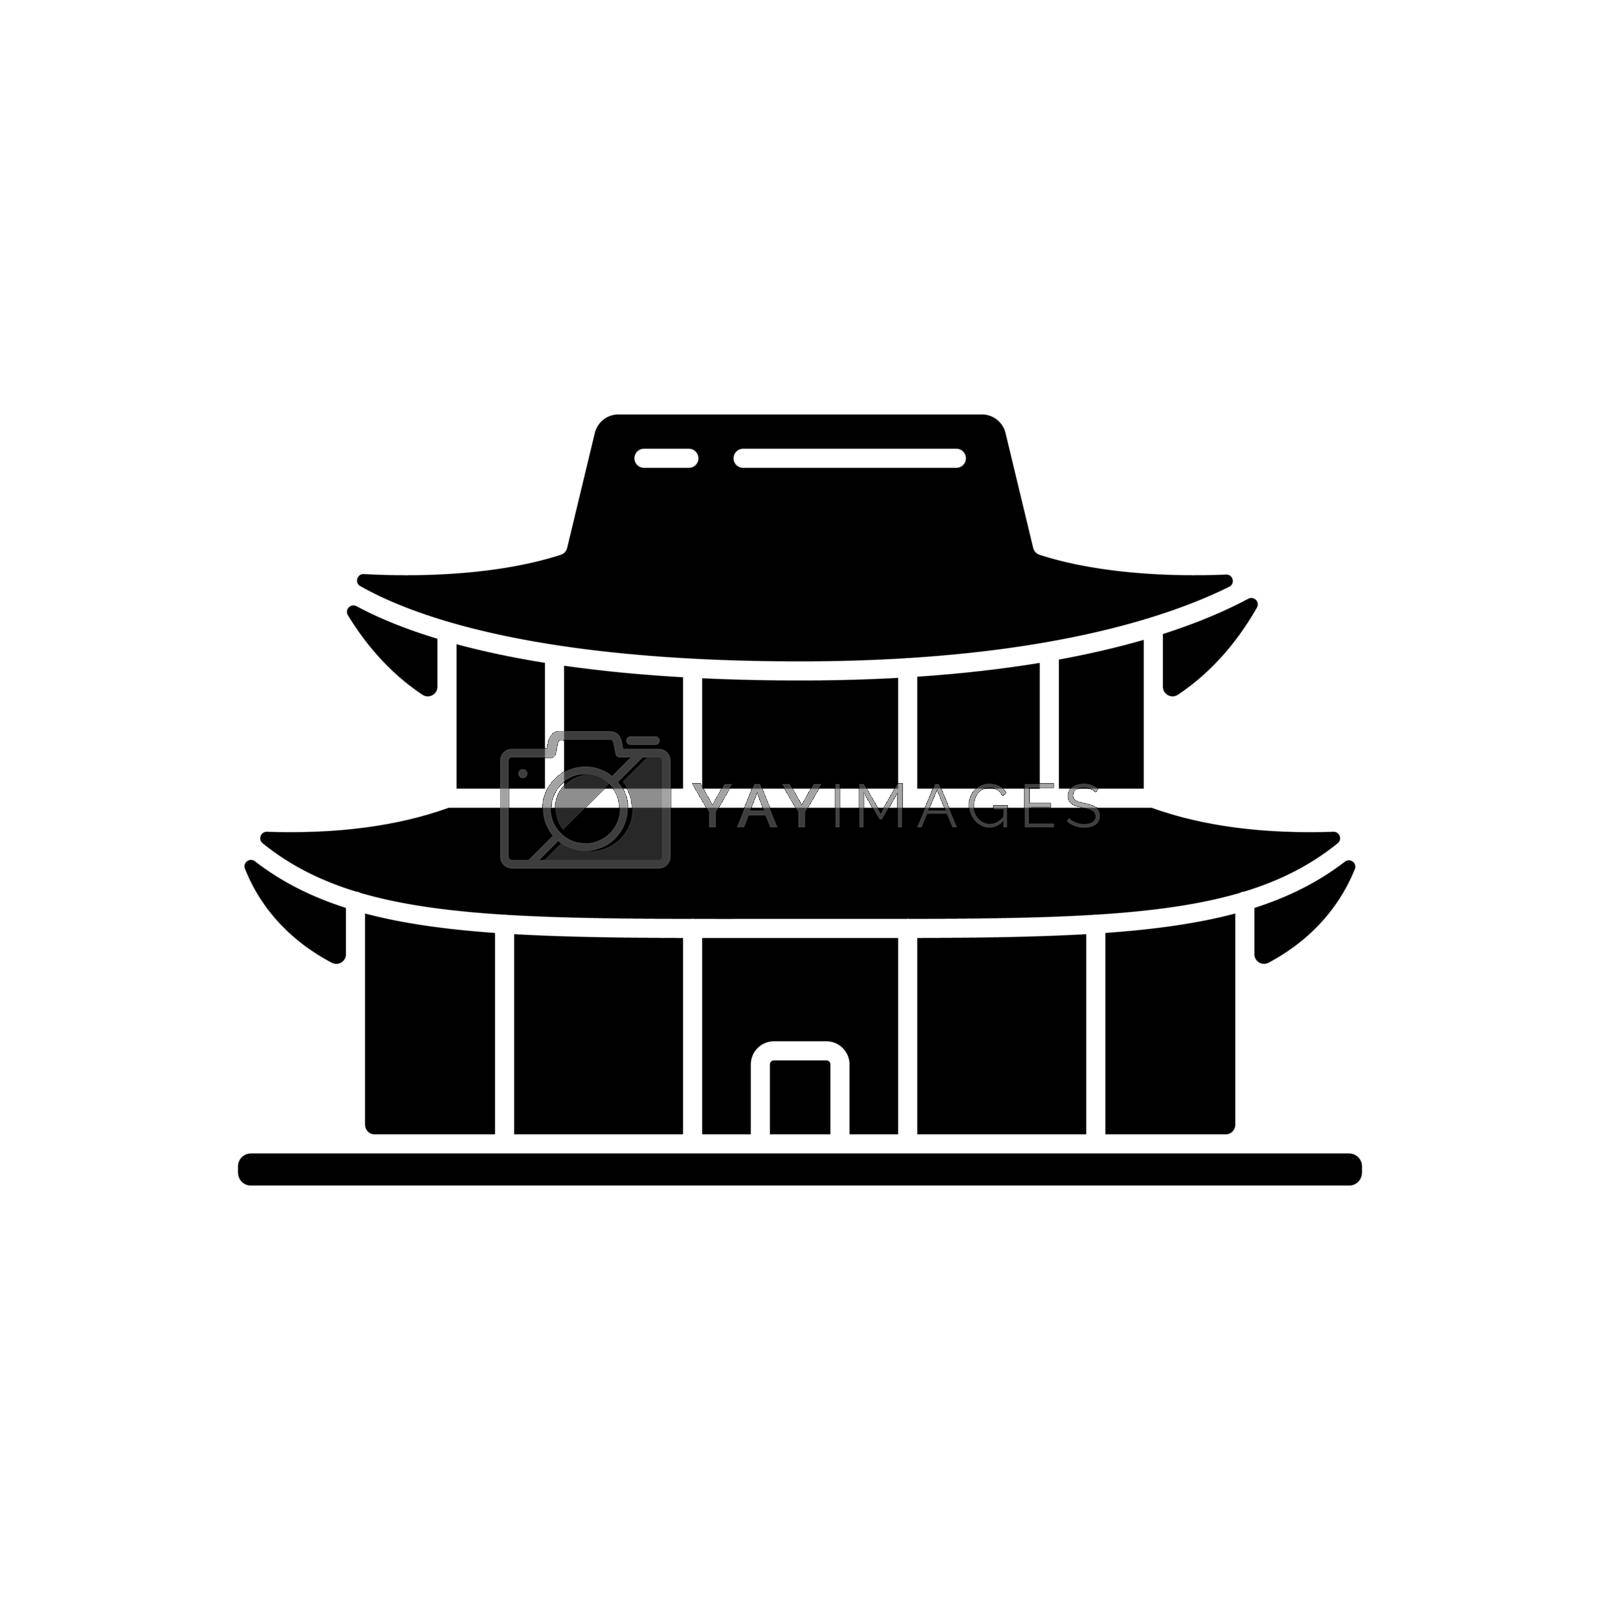 Royalty free image of Gyeongbok palace black glyph icon by bsd